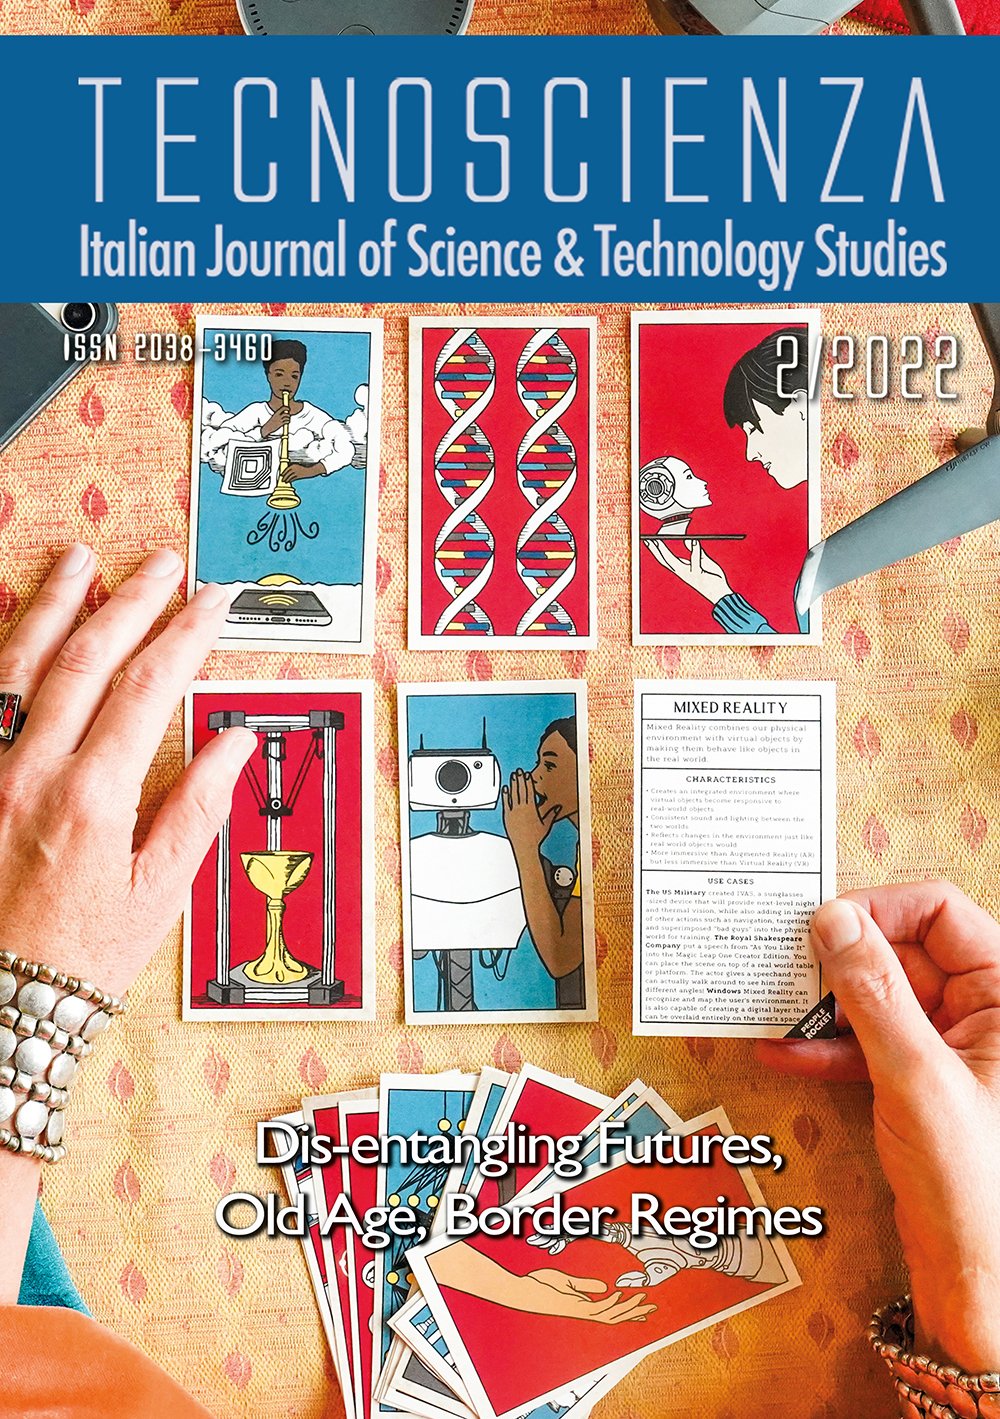 "Our Lady of Technology Tarot Cards" by Tessa Forshaw, Rich Braden, Ailsa Petrie, and Natasha Bach. Cover of Tecnoscienza number 26 (2nd Issue, Year 2022)